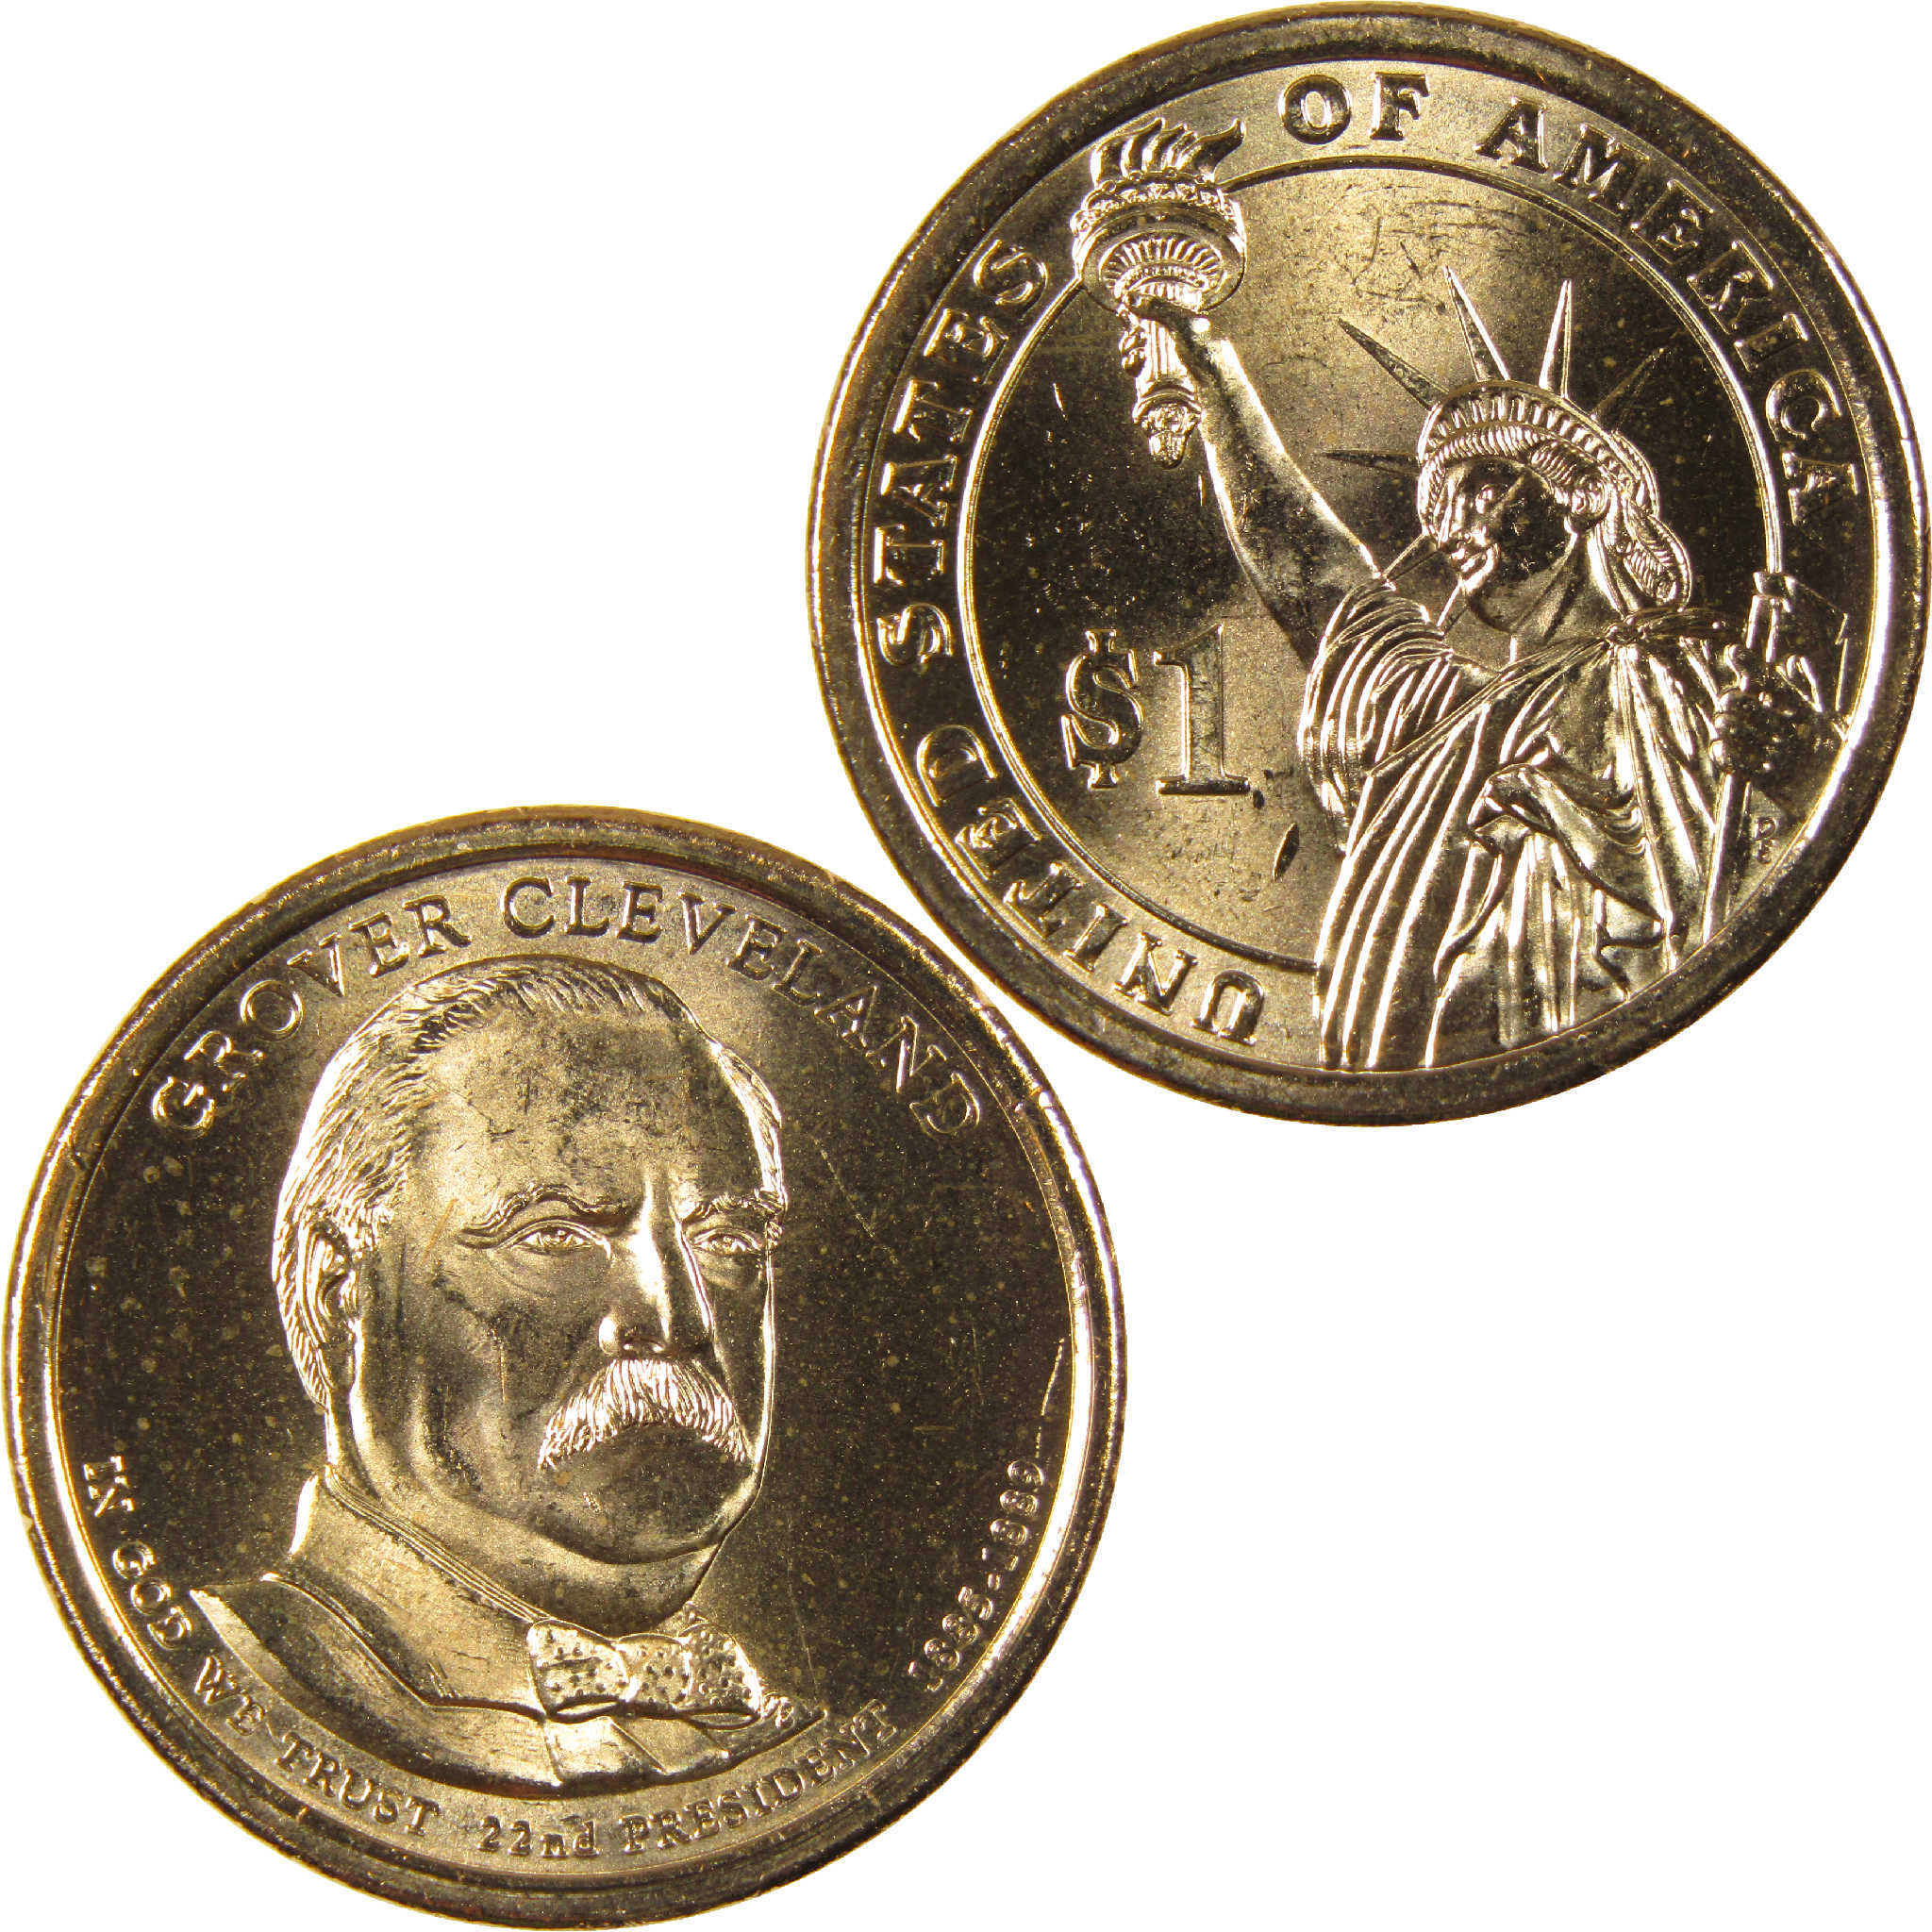 2012 D Grover Cleveland 1st Term Presidential Dollar Uncirculated $1